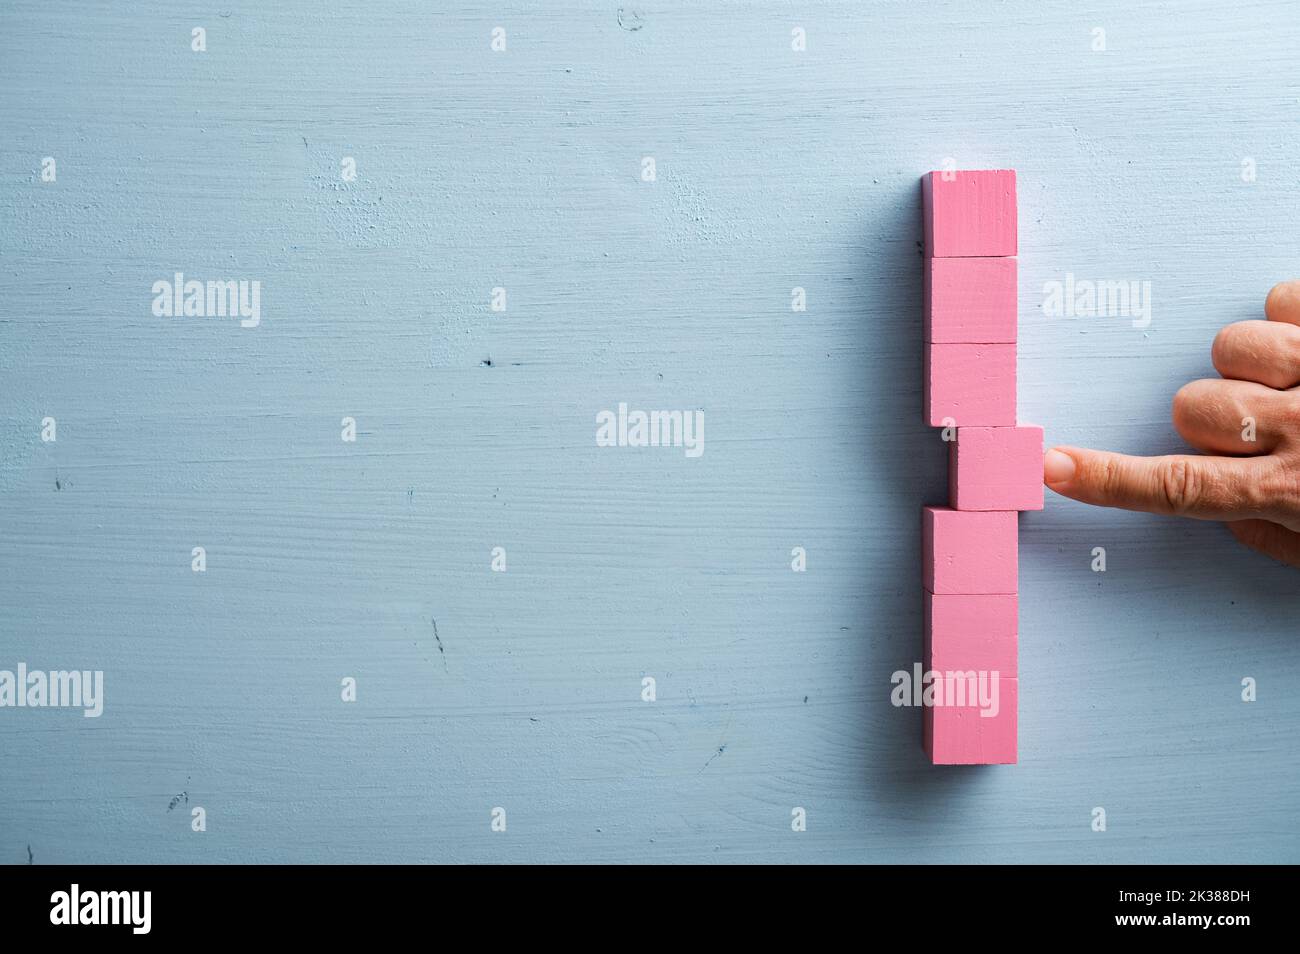 Male finger pushing a pink wooden block into a stack of them. Over blue background with plenty of copy space. Stock Photo